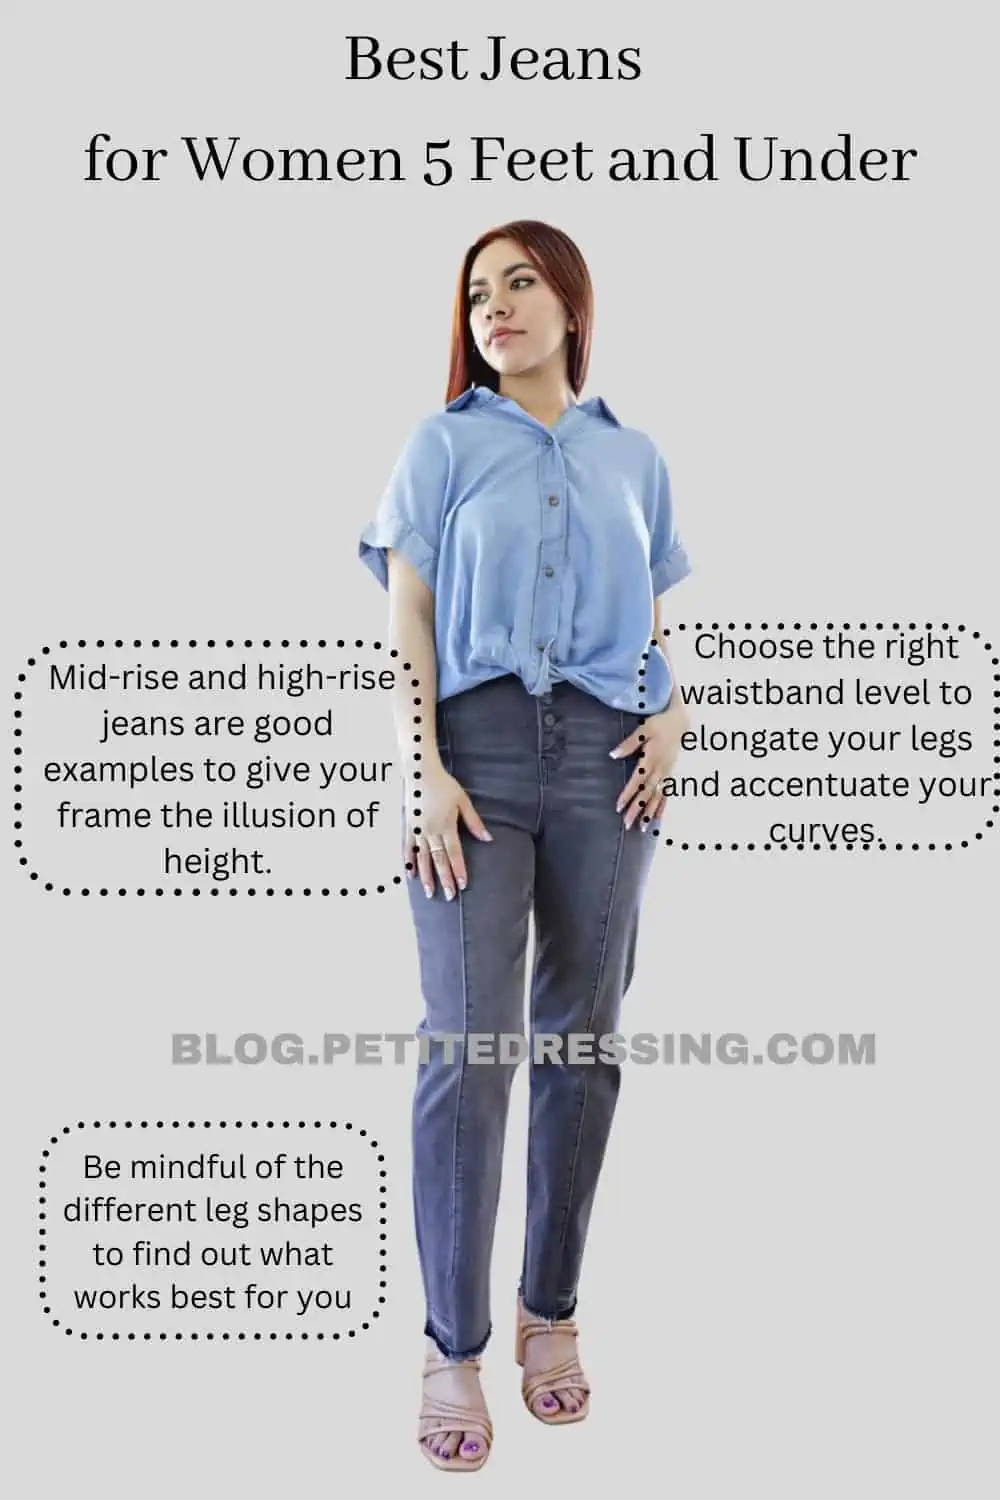 The Jeans Guide for Women 5 Feet and Under - Petite Dressing